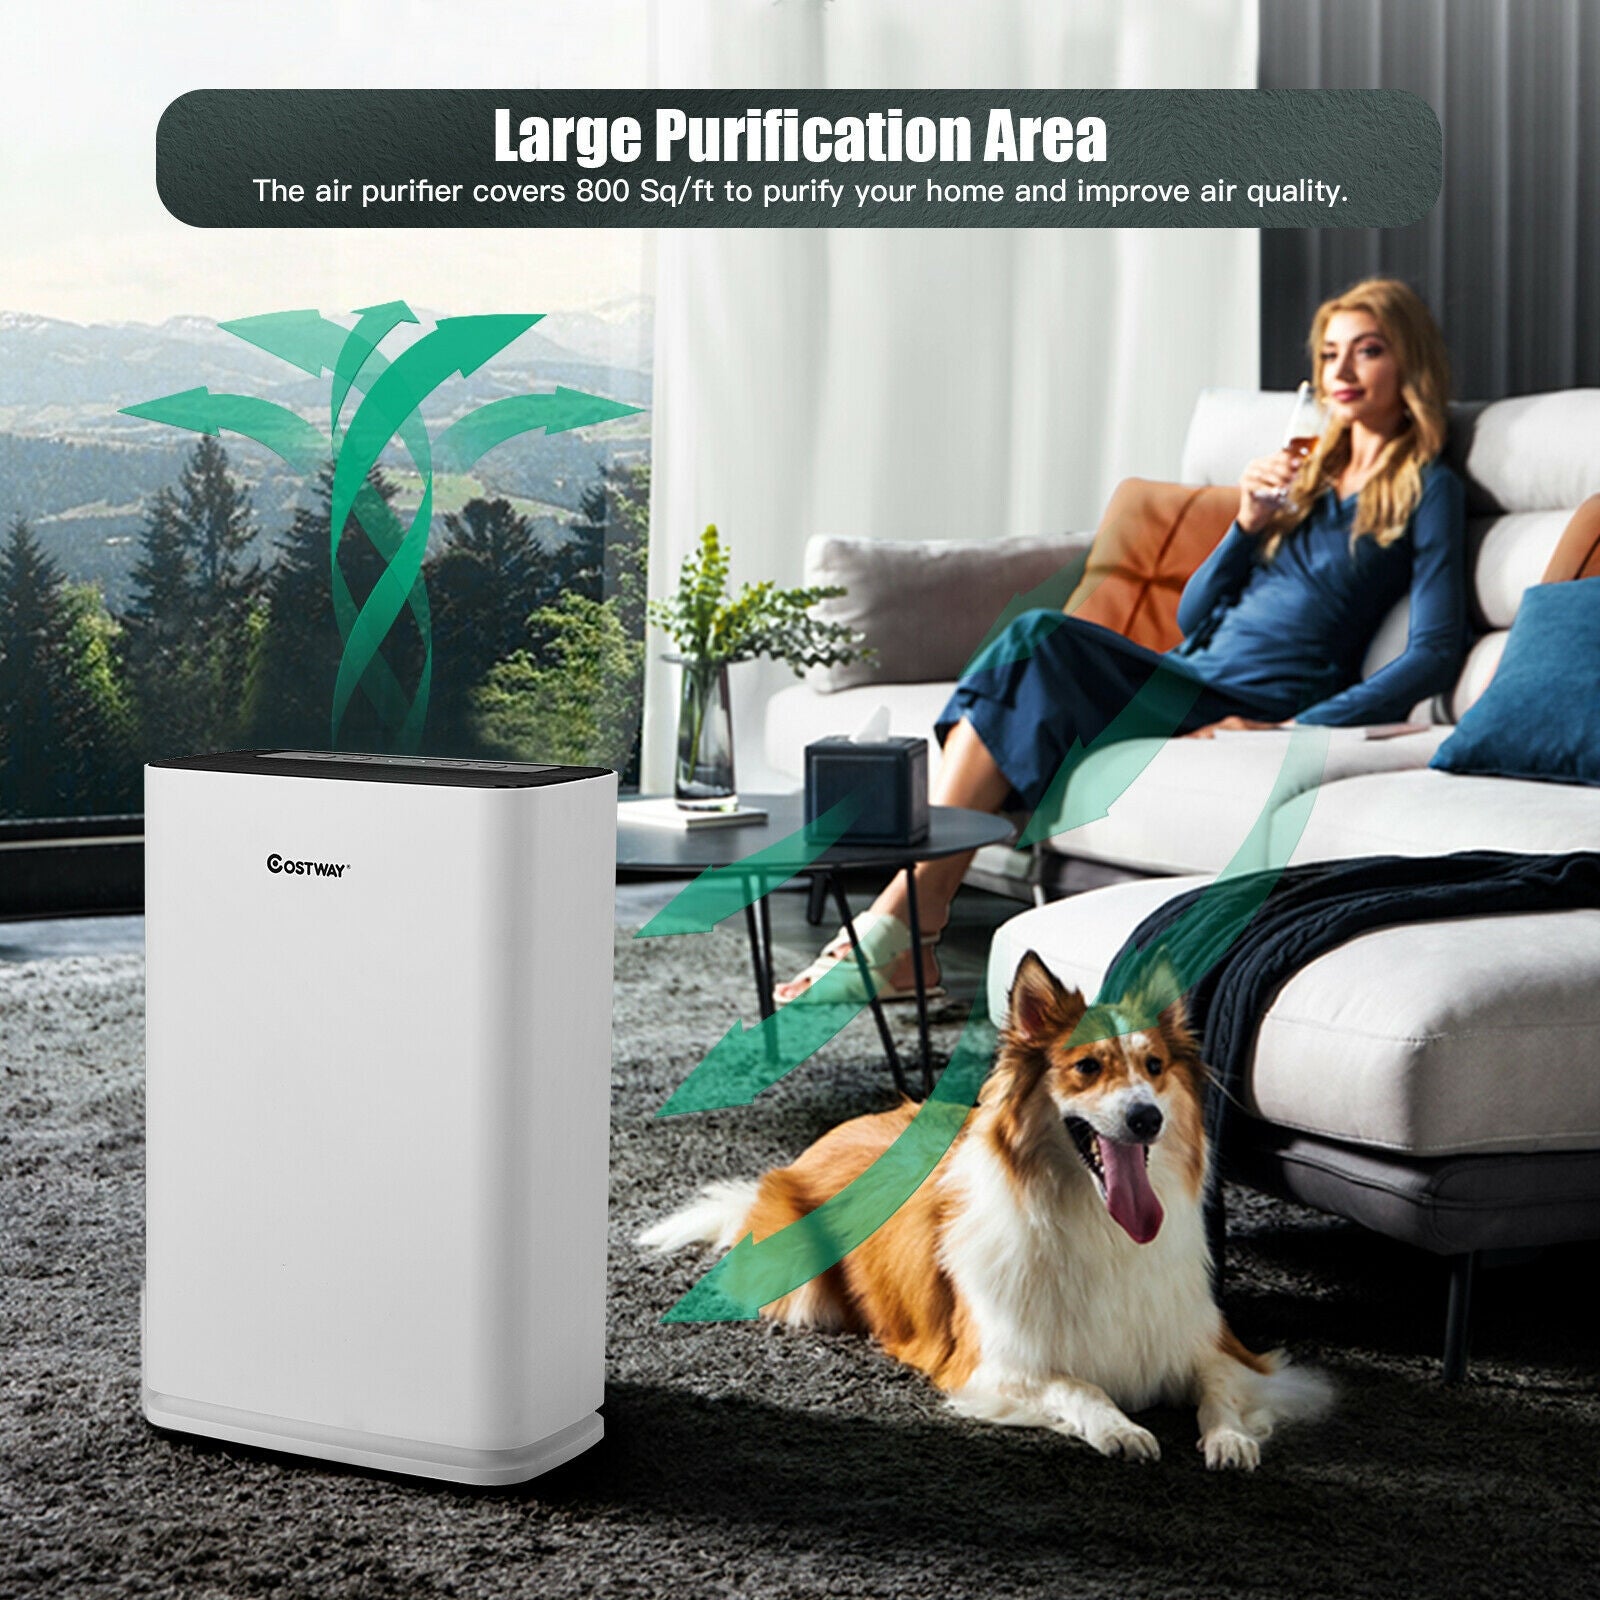 High Efficient Air Purifier: With a CADR of 300m3/h, making it suitable for various locations such as bedrooms, living rooms, and kitchens. It consists of a pre-filter, a HEPA-efficient filter, and an activated carbon filter, effectively eliminating dust, allergens, smoke, odors, pet fur, and more.